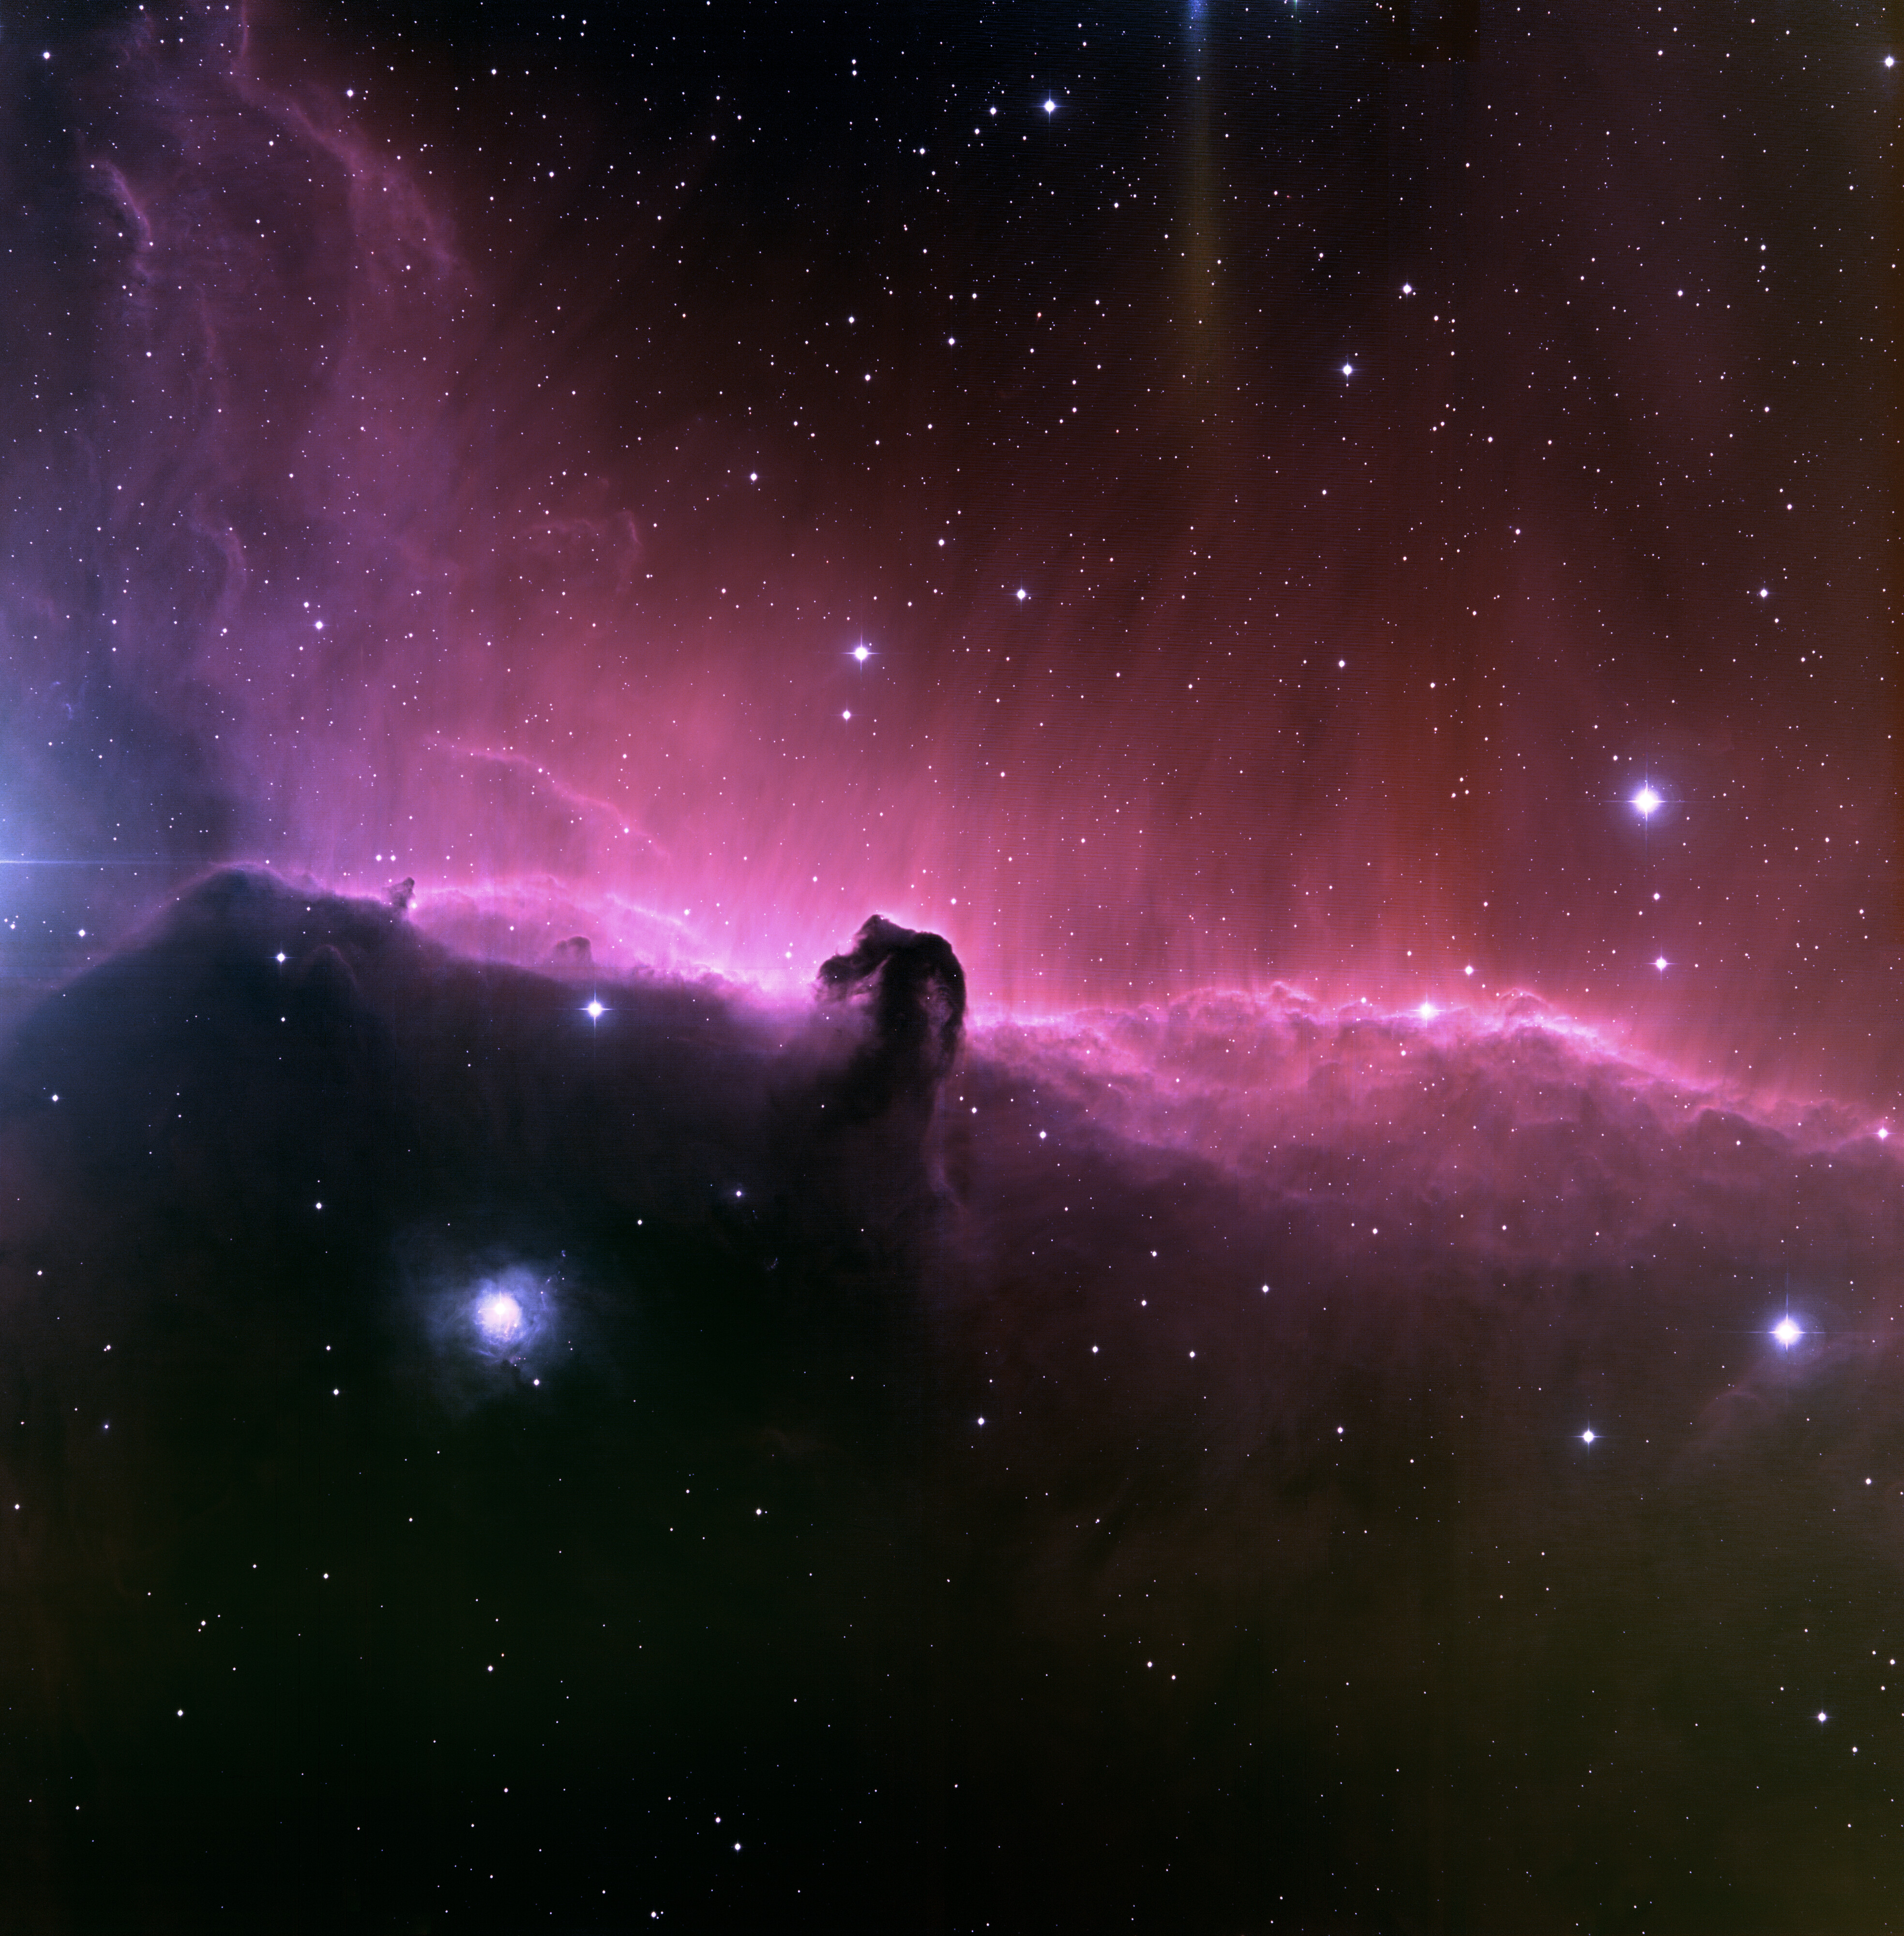 A vibrant cosmic image captured by the JWST featuring a shadowy horsehead nebula silhouetted against a luminous pink and purple gas cloud sprinkled with scattered stars.